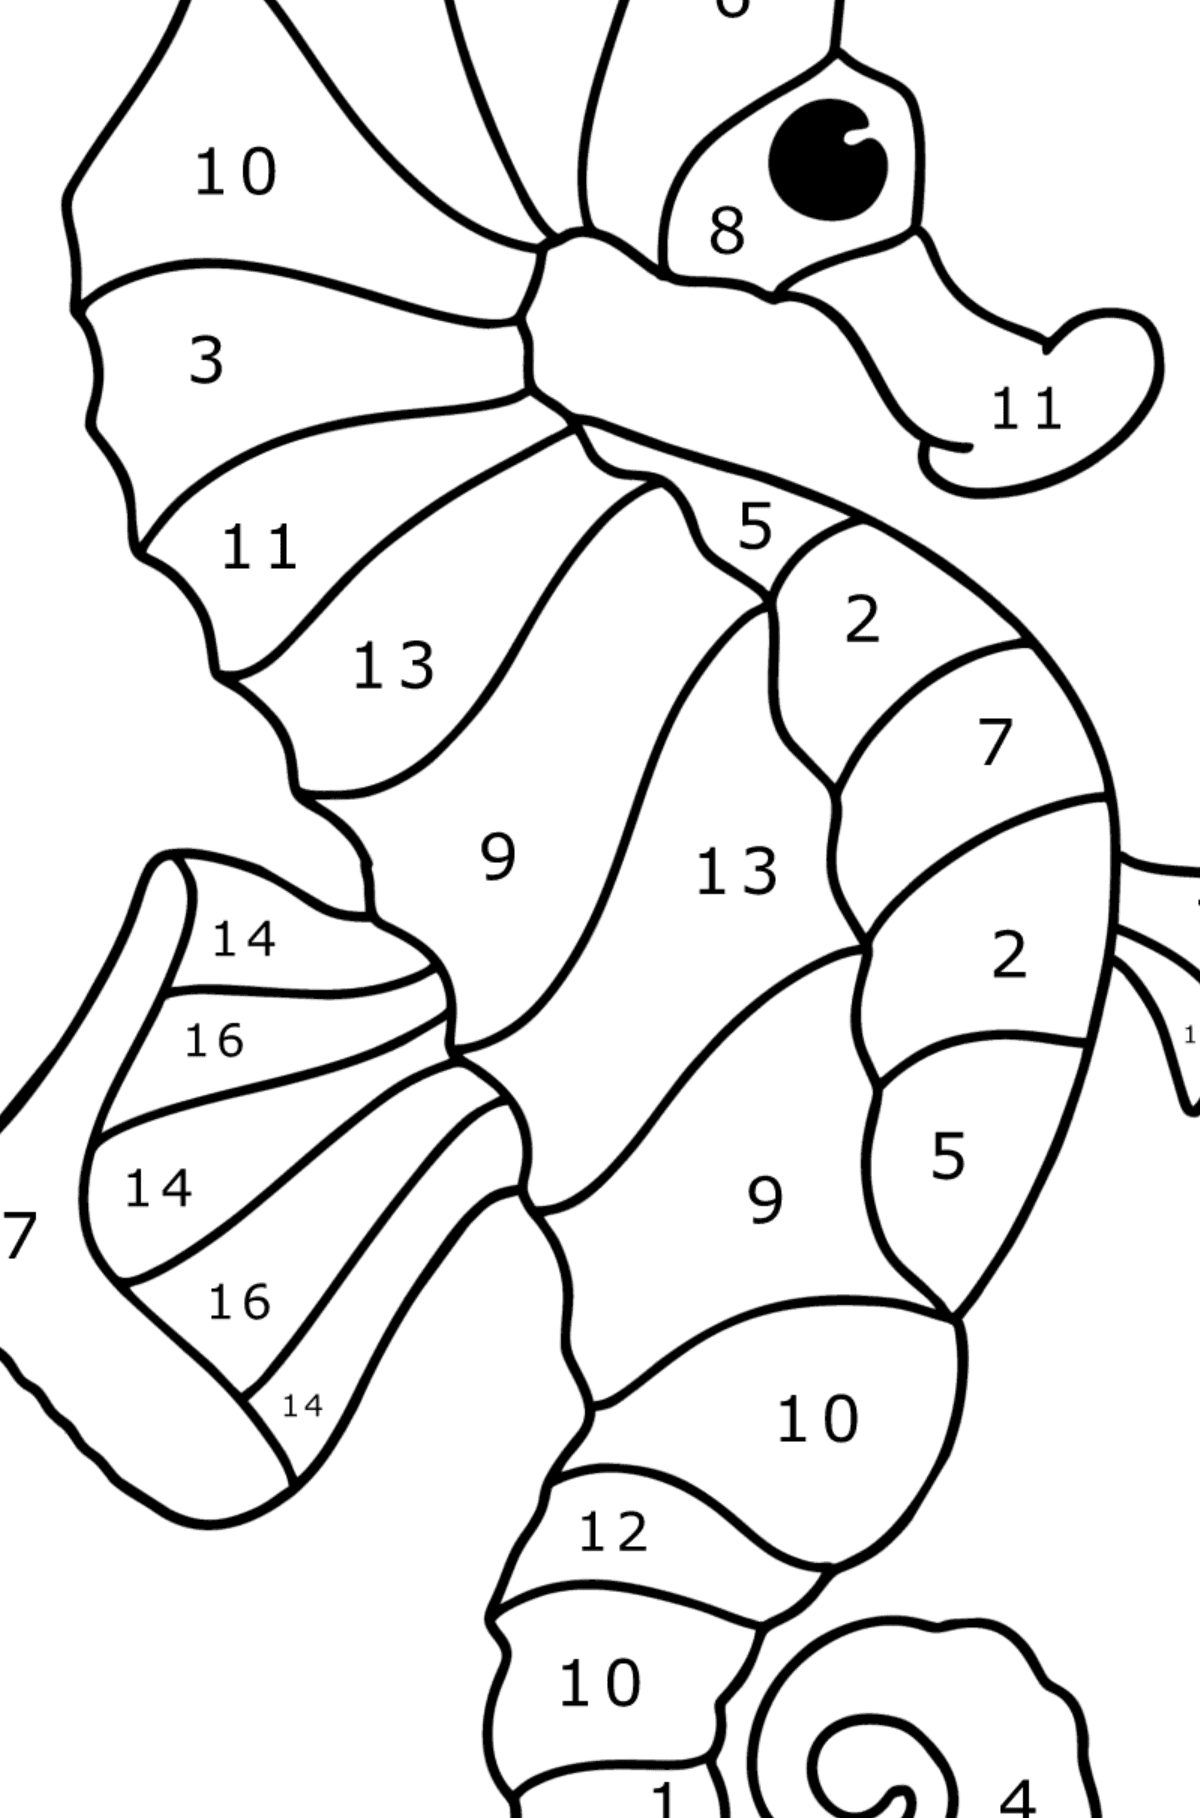 Sea Horse coloring page - Coloring by Numbers for Kids